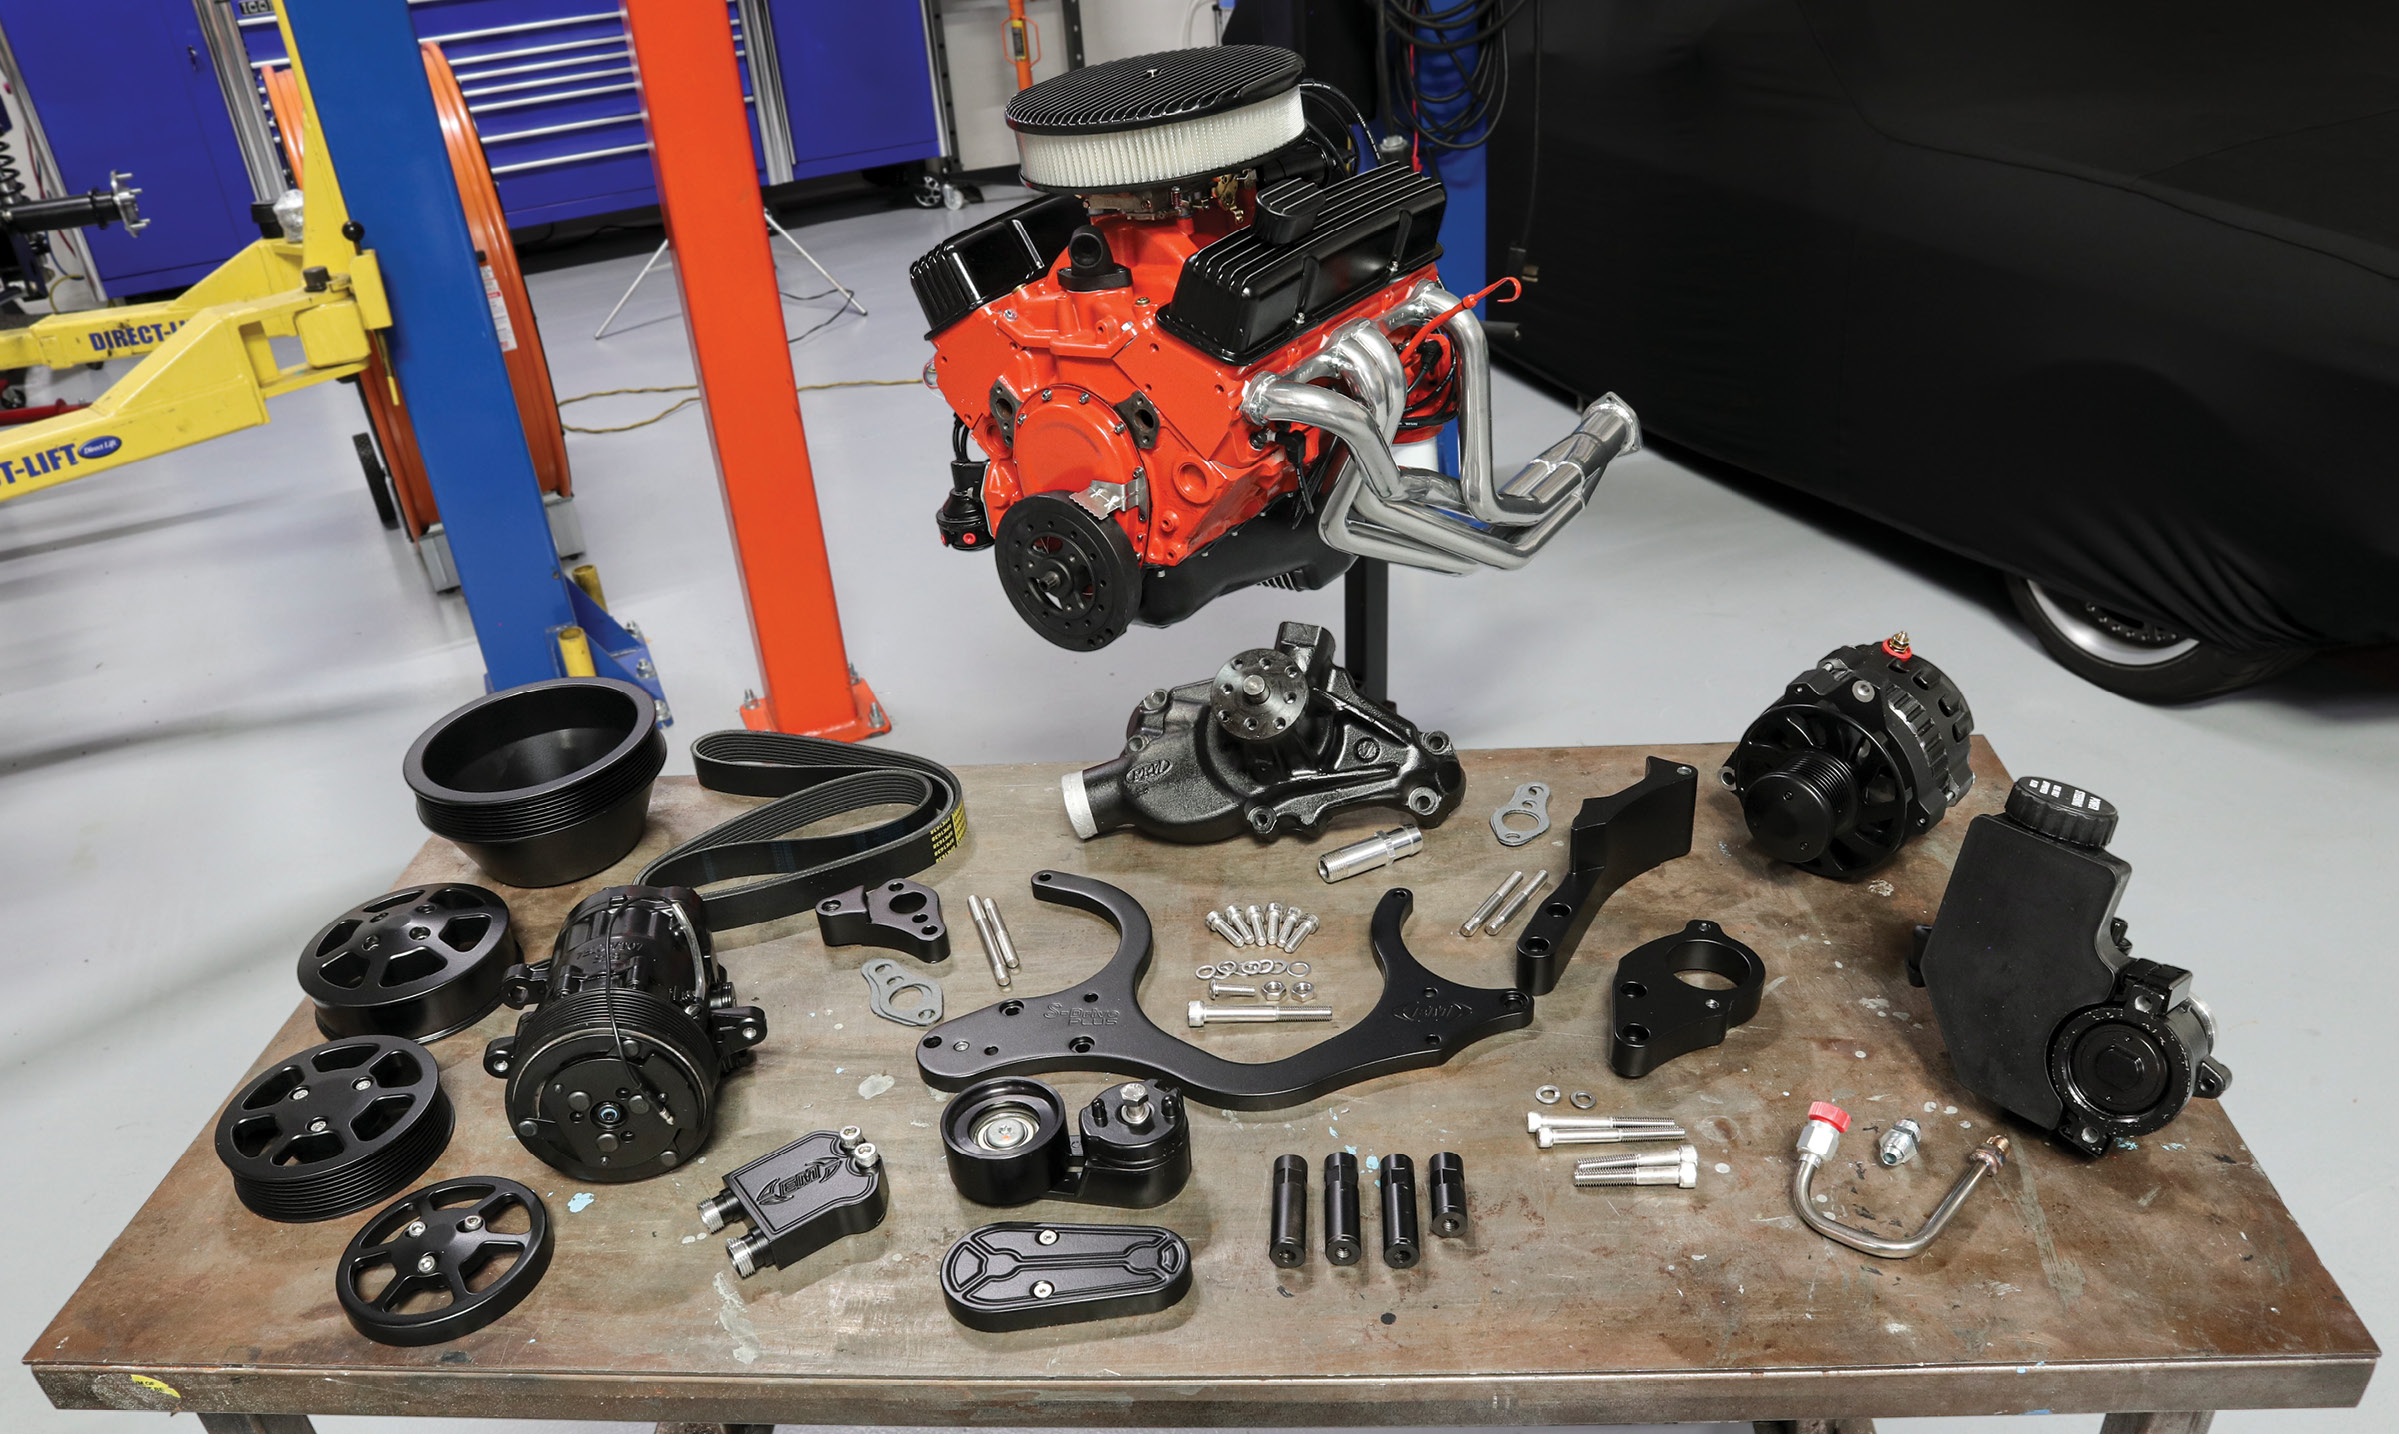 The Eddie Motorsports serpentine system comes with all the parts needed to install from the hardware to the pulleys and even the belt. All we needed to grab was RTV, antiseize, thread-locker, and some basic hand tools.